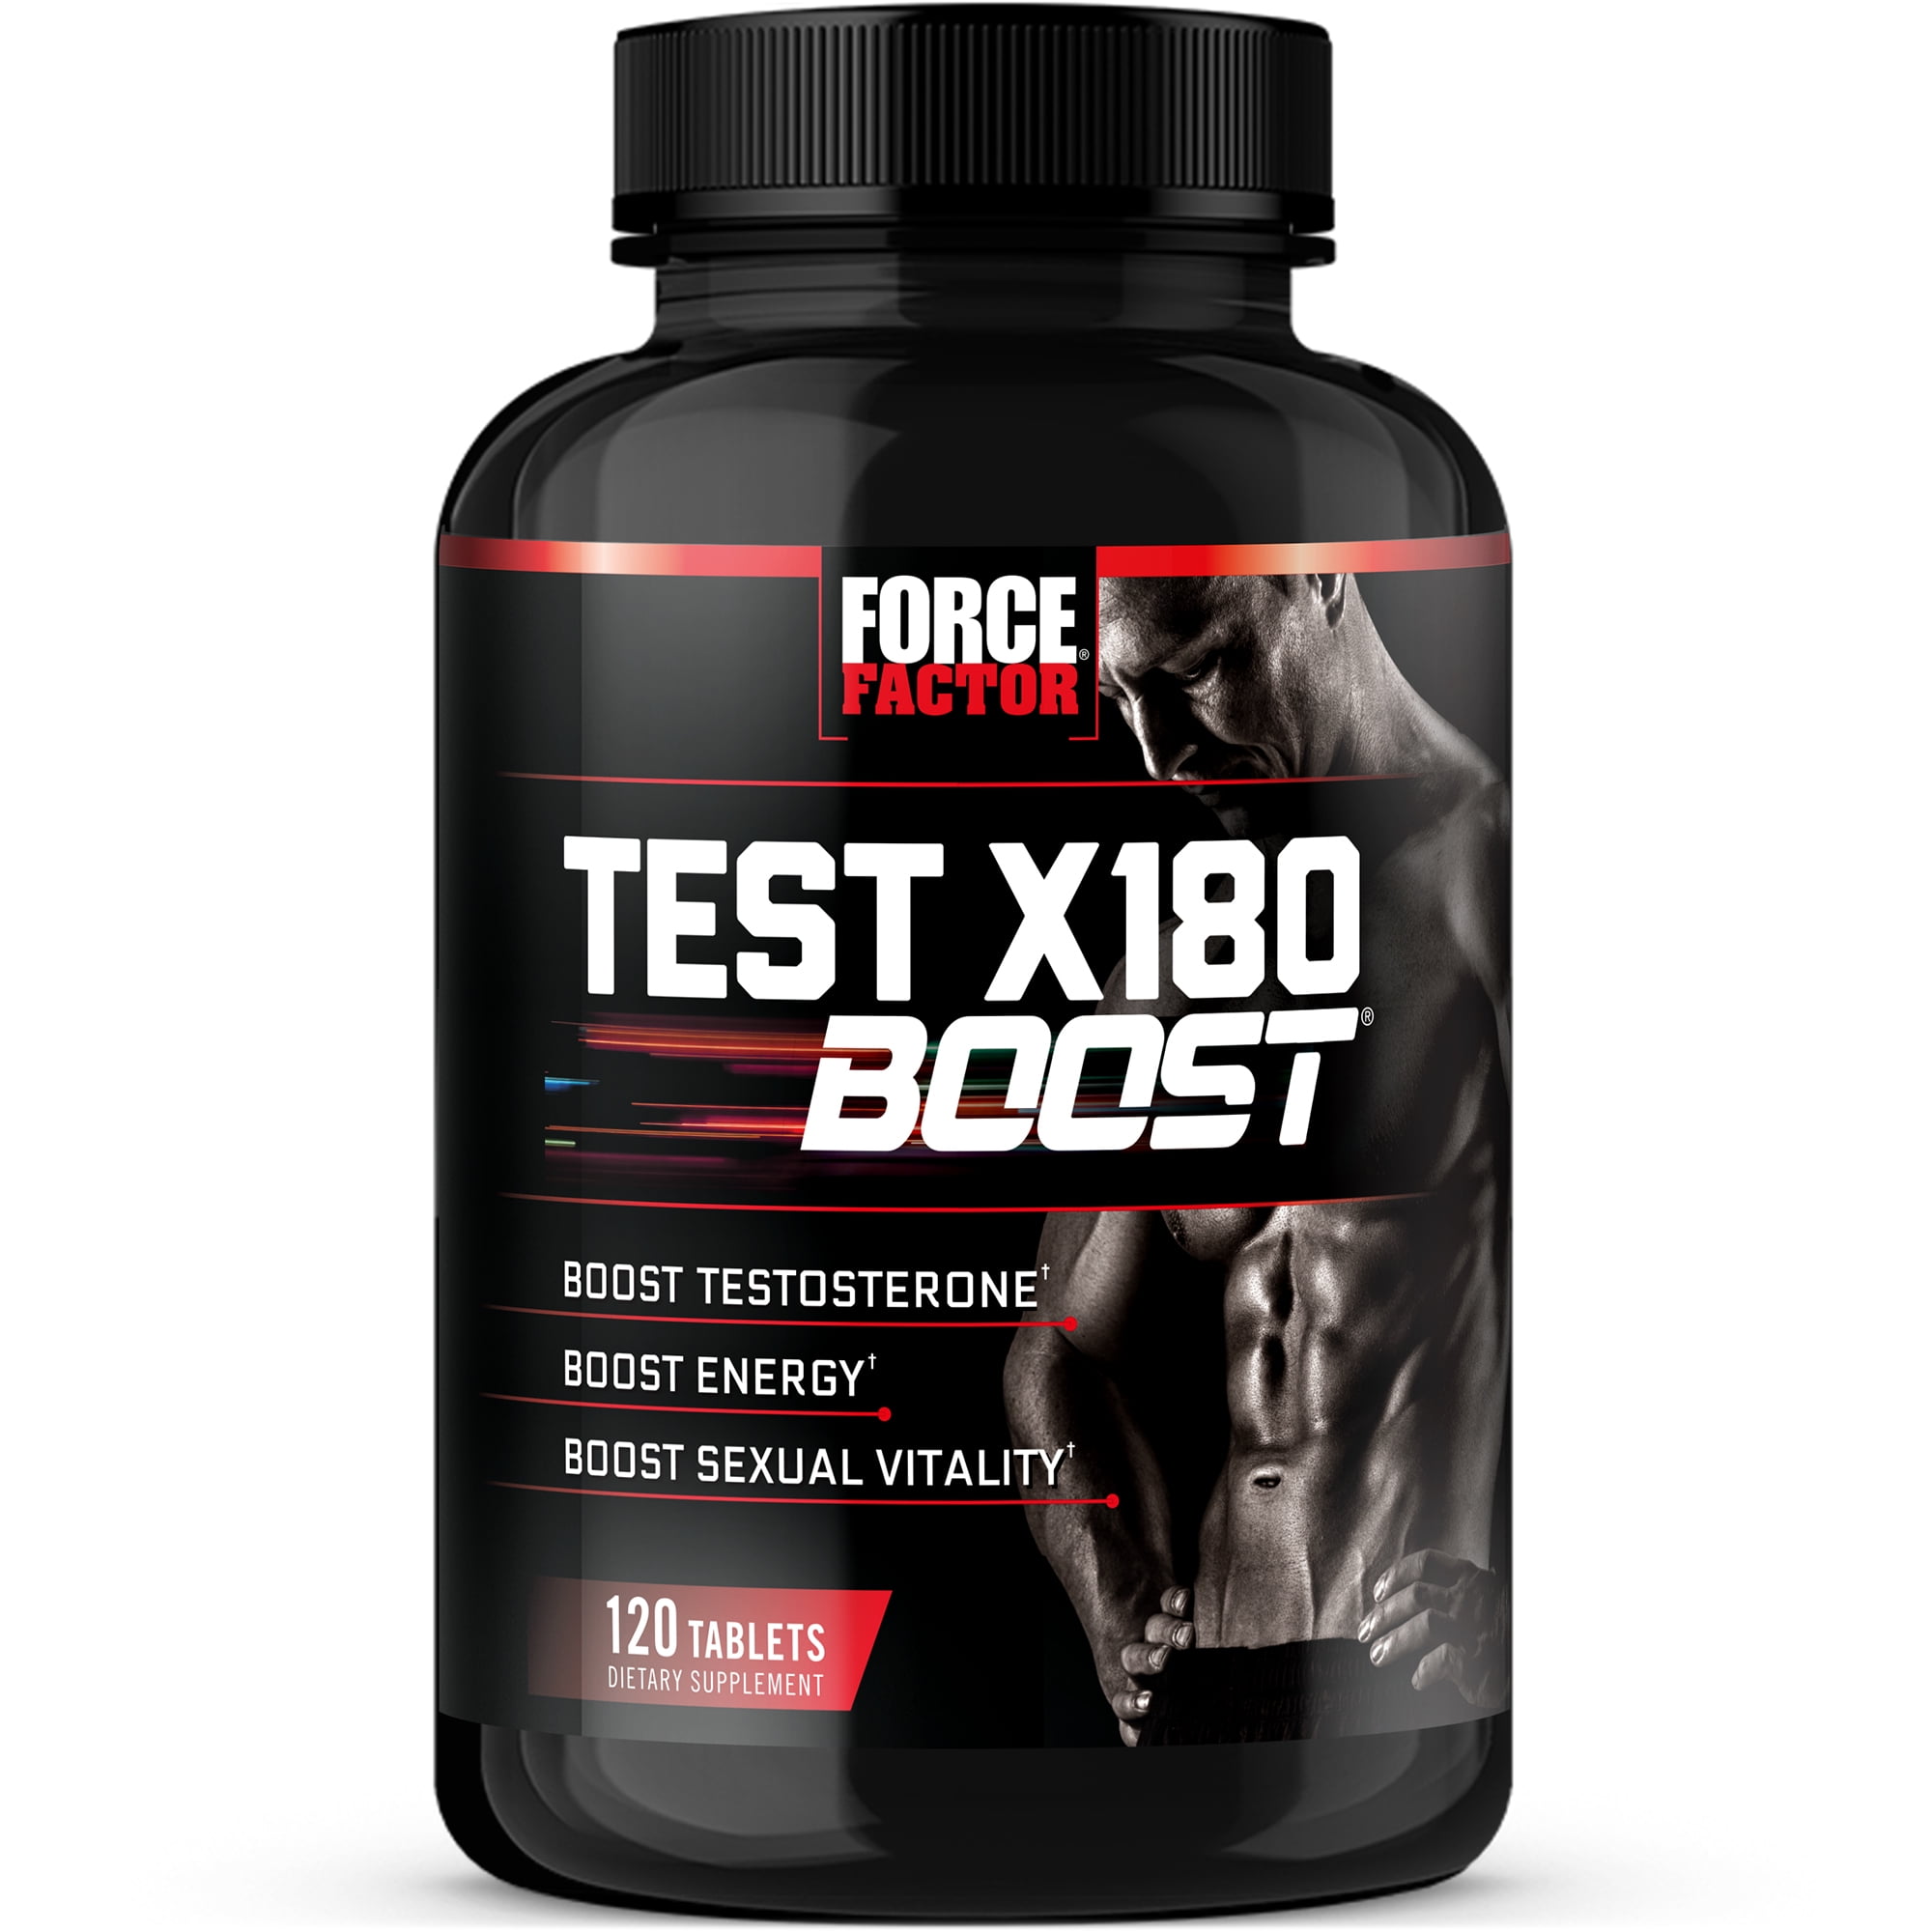 Force Factor Test X180 Boost, Pre-Workout Testosterone Booster, 120 Tablets